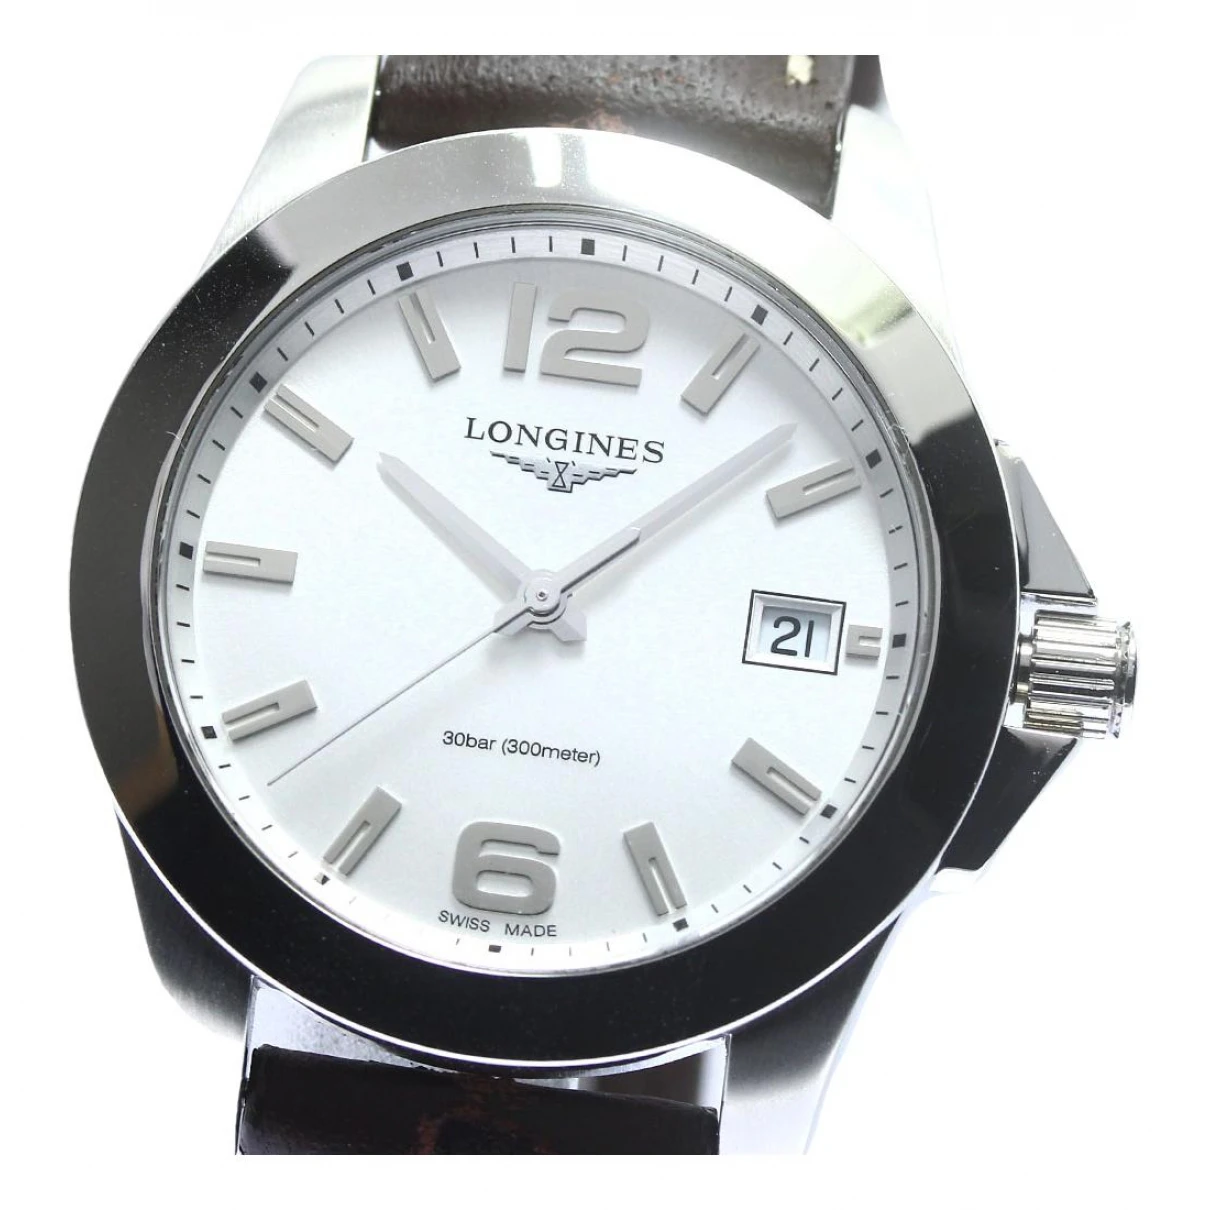 accessories Longines watches Conquest for Male Steel. Used condition